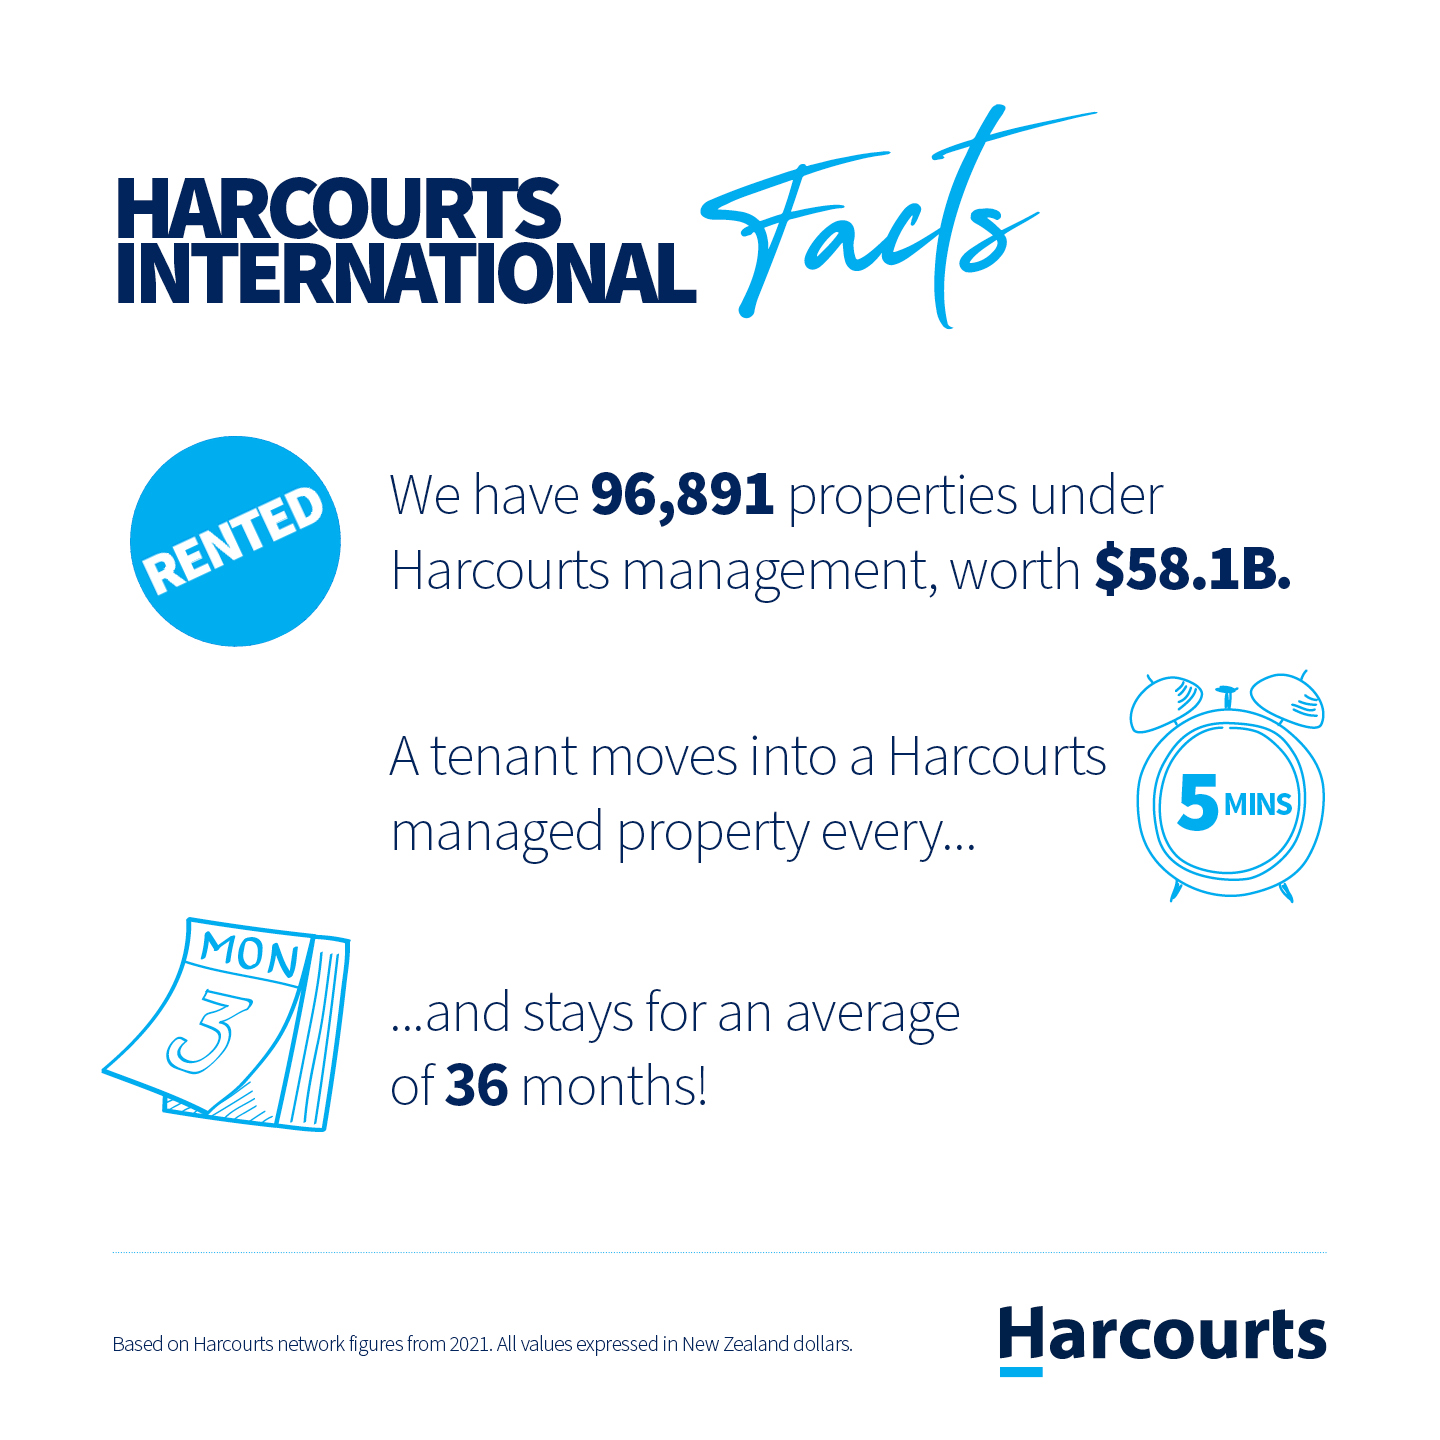 Fact: We have 96,891 properties under Harcourts management, worth $58.1B. A Tenant moves into a Harcourts managed property every 5 minutes.